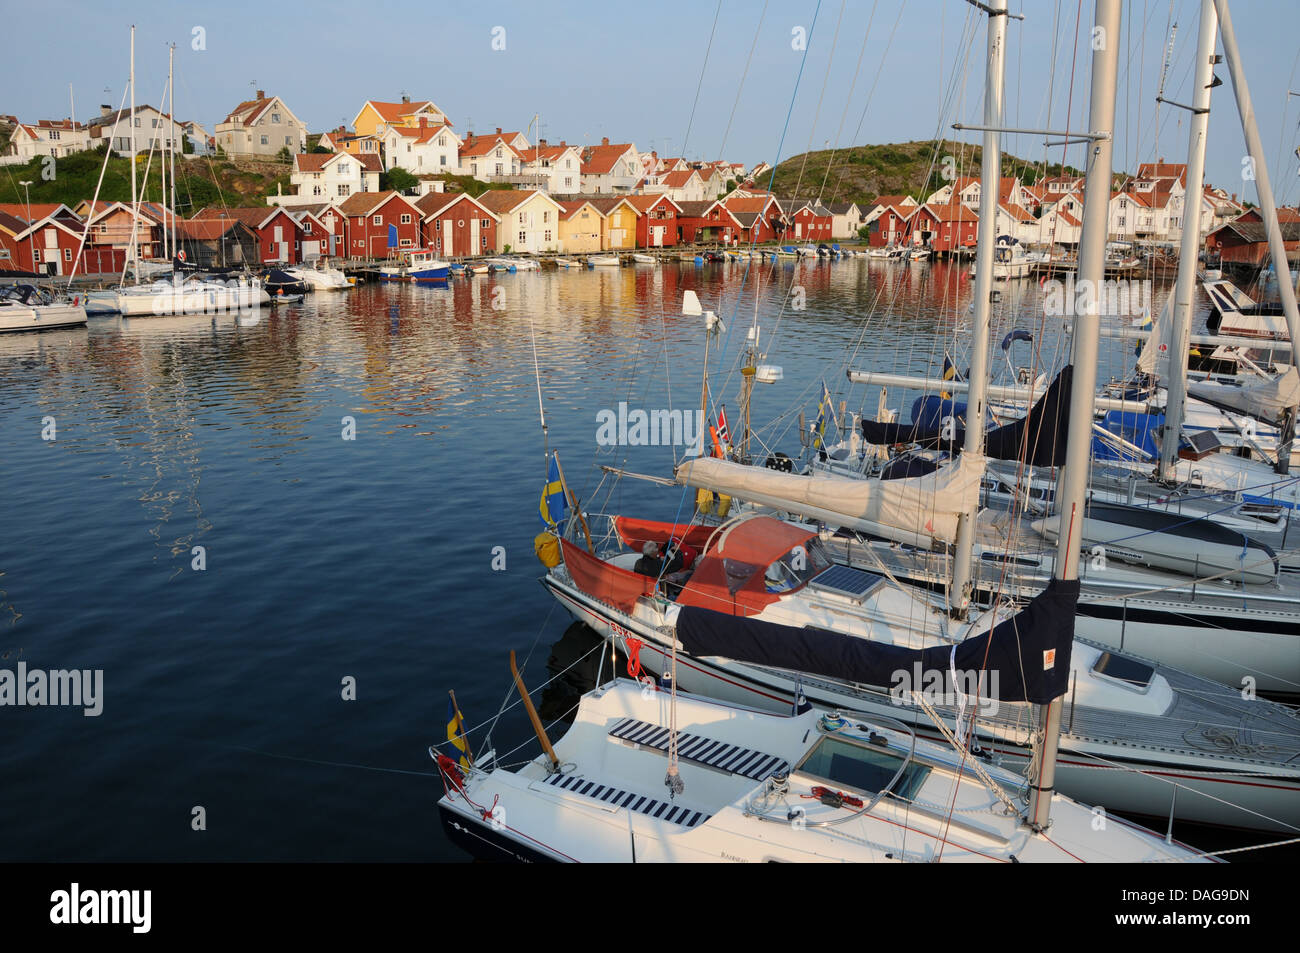 Fishing village 0f Grundsund on West Coast of Sweden with yachts, wooden docks, boathouses and colorful homes Stock Photo